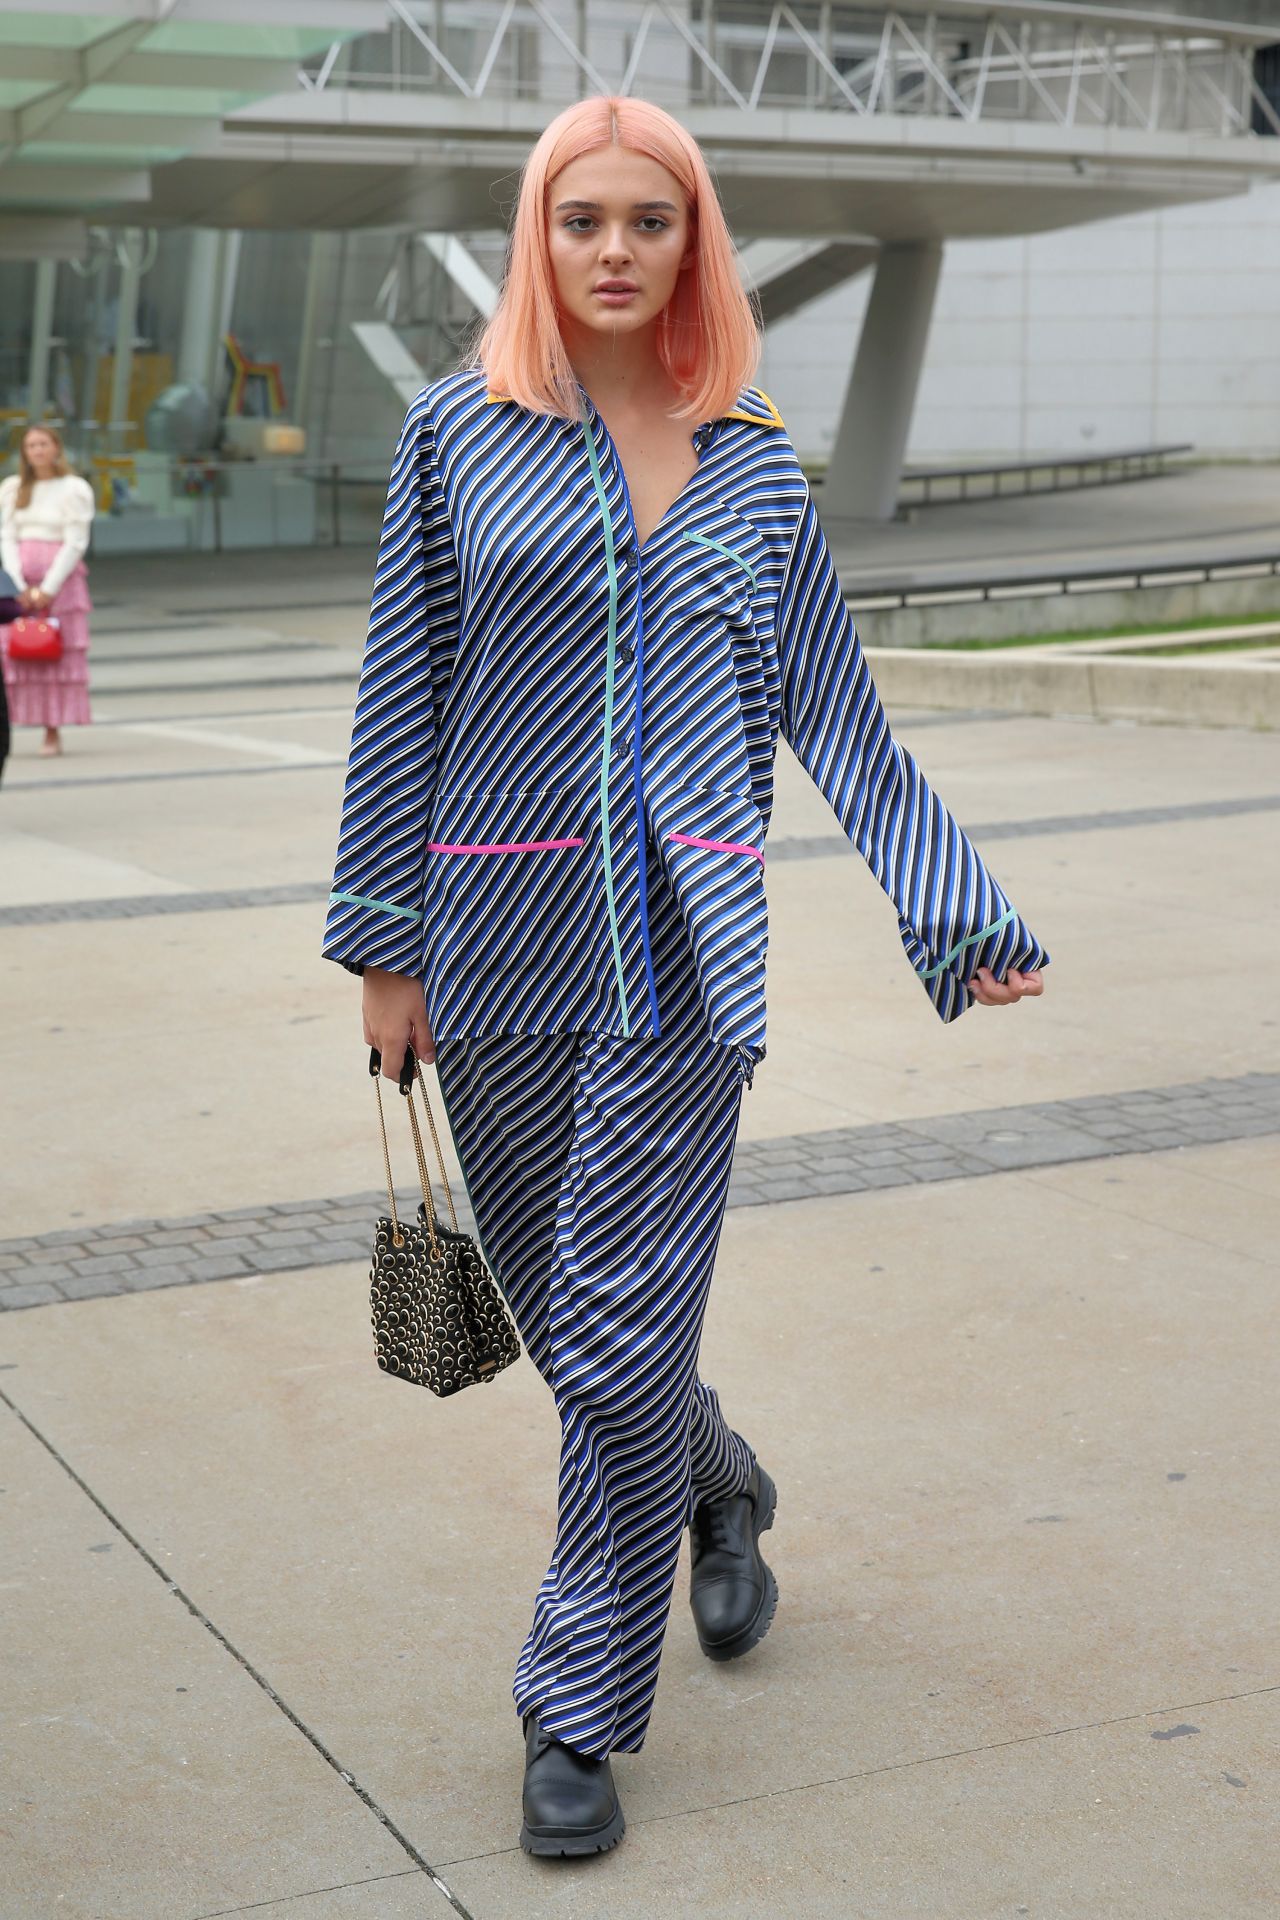 charlotte-lawrence-tory-burch-fashion-show-in-nyc-09-08-2019-2.jpg